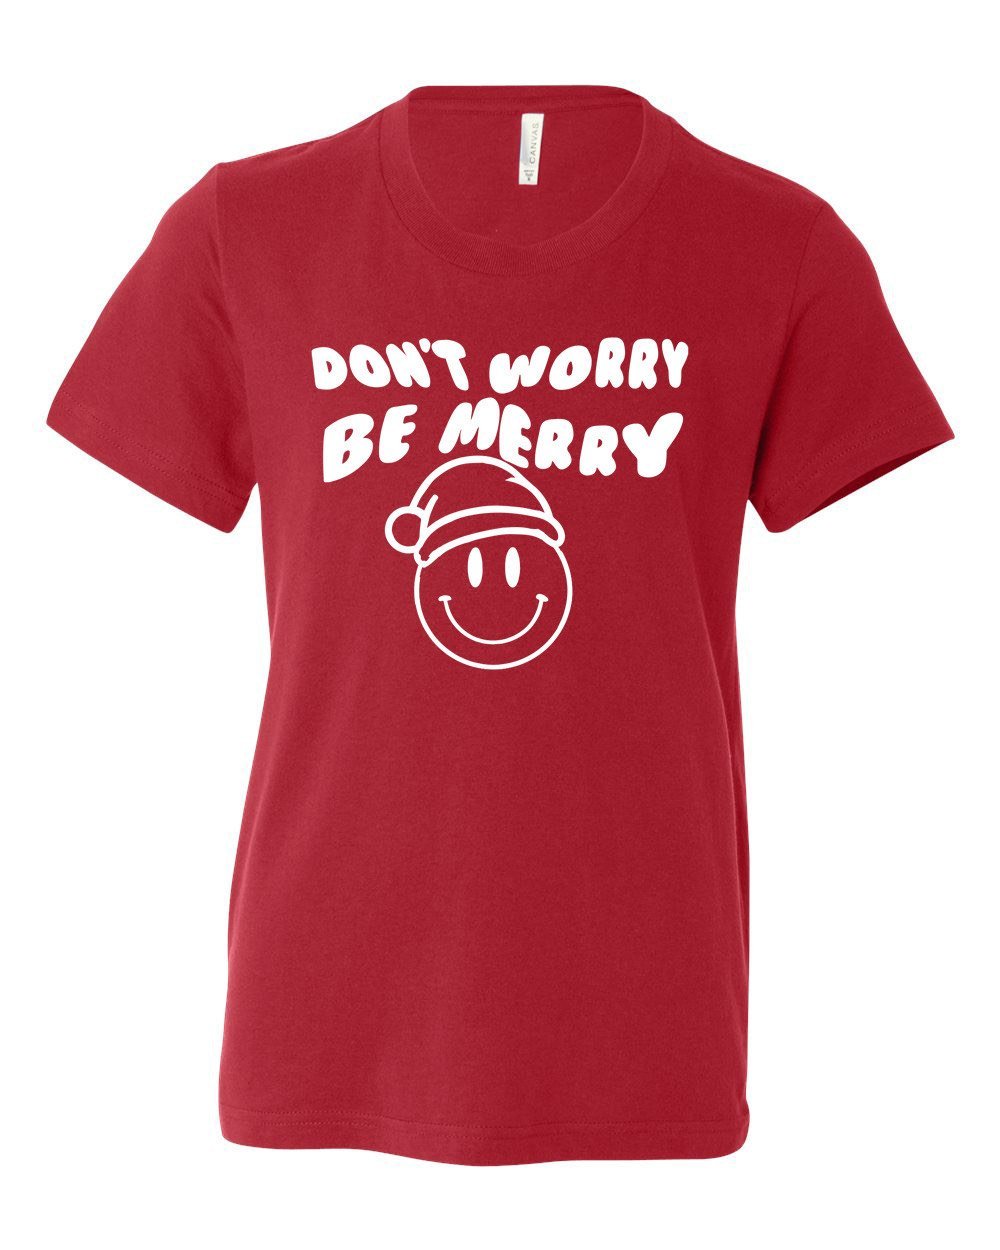 LivyLu Kids Don't Worry Be Merry Red Puff Ink Tee